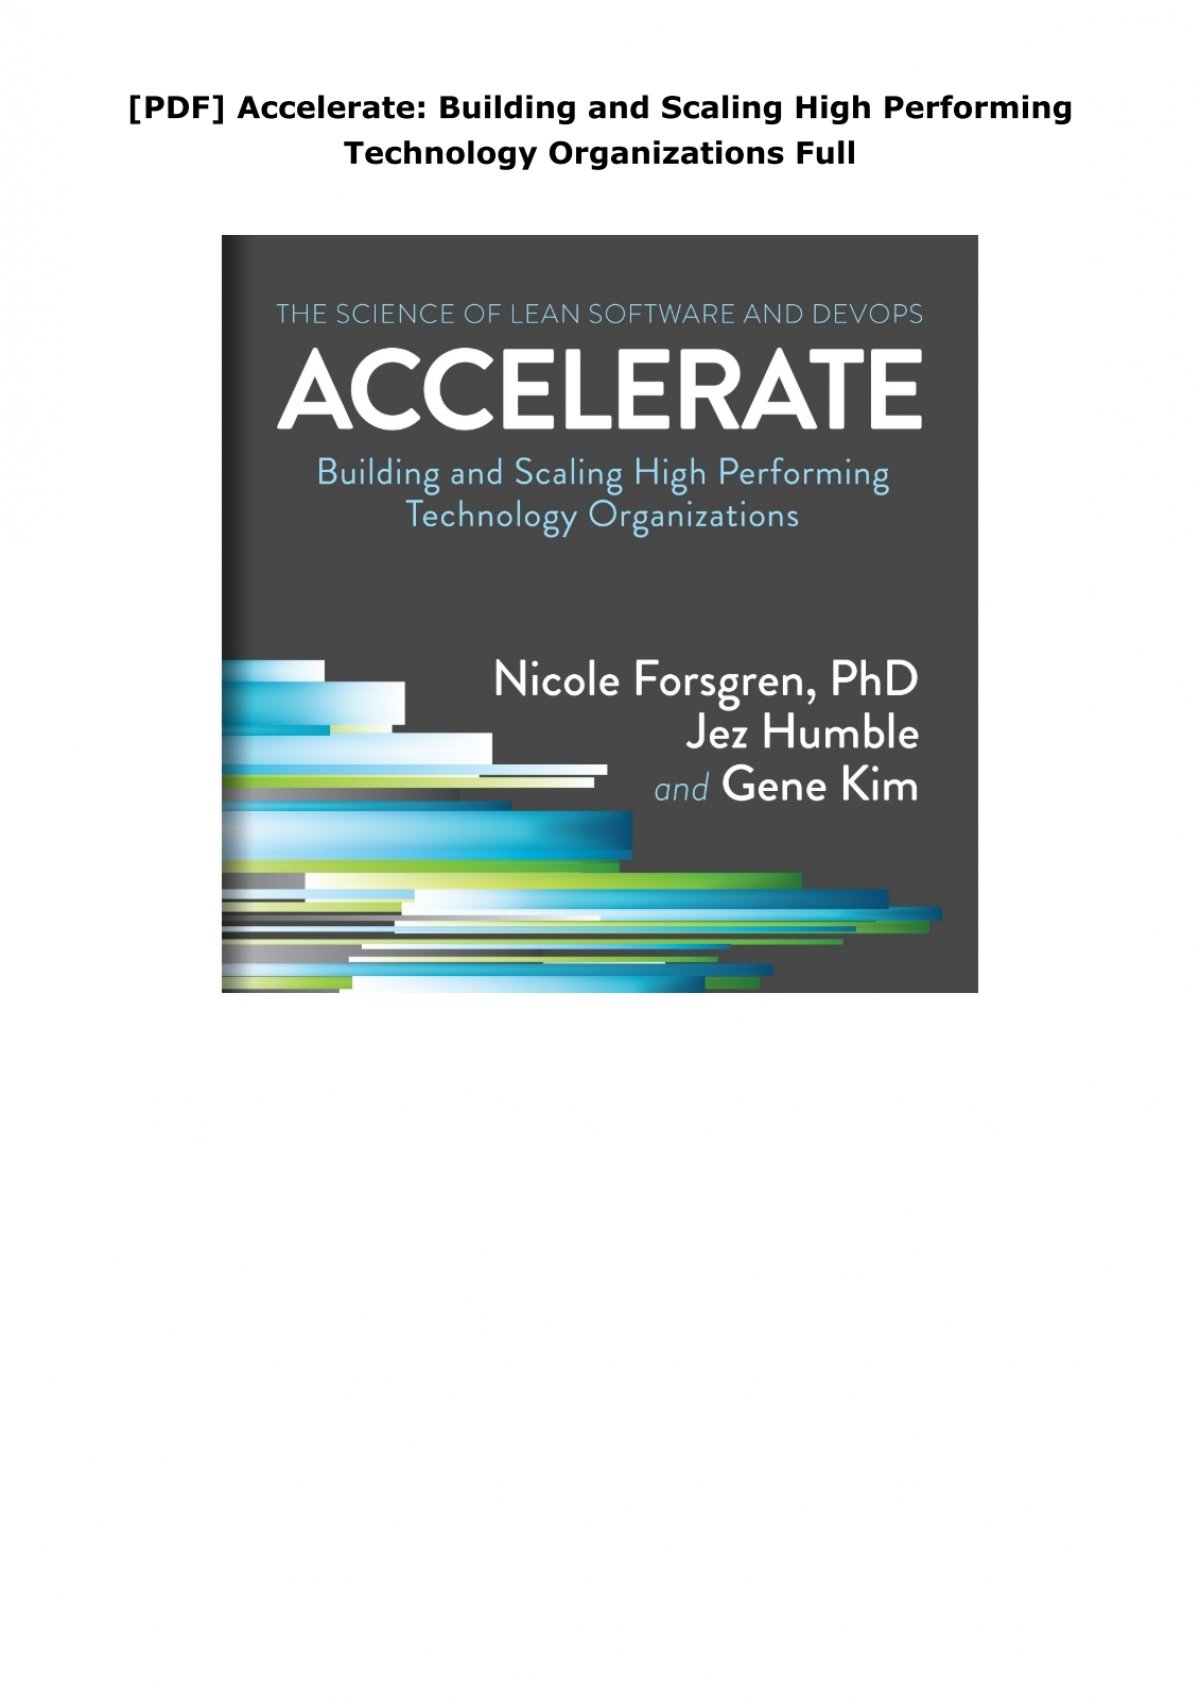 Accelerate: The Science of Lean Software and DevOps: Building and Scaling  High Performing Technology Organizations